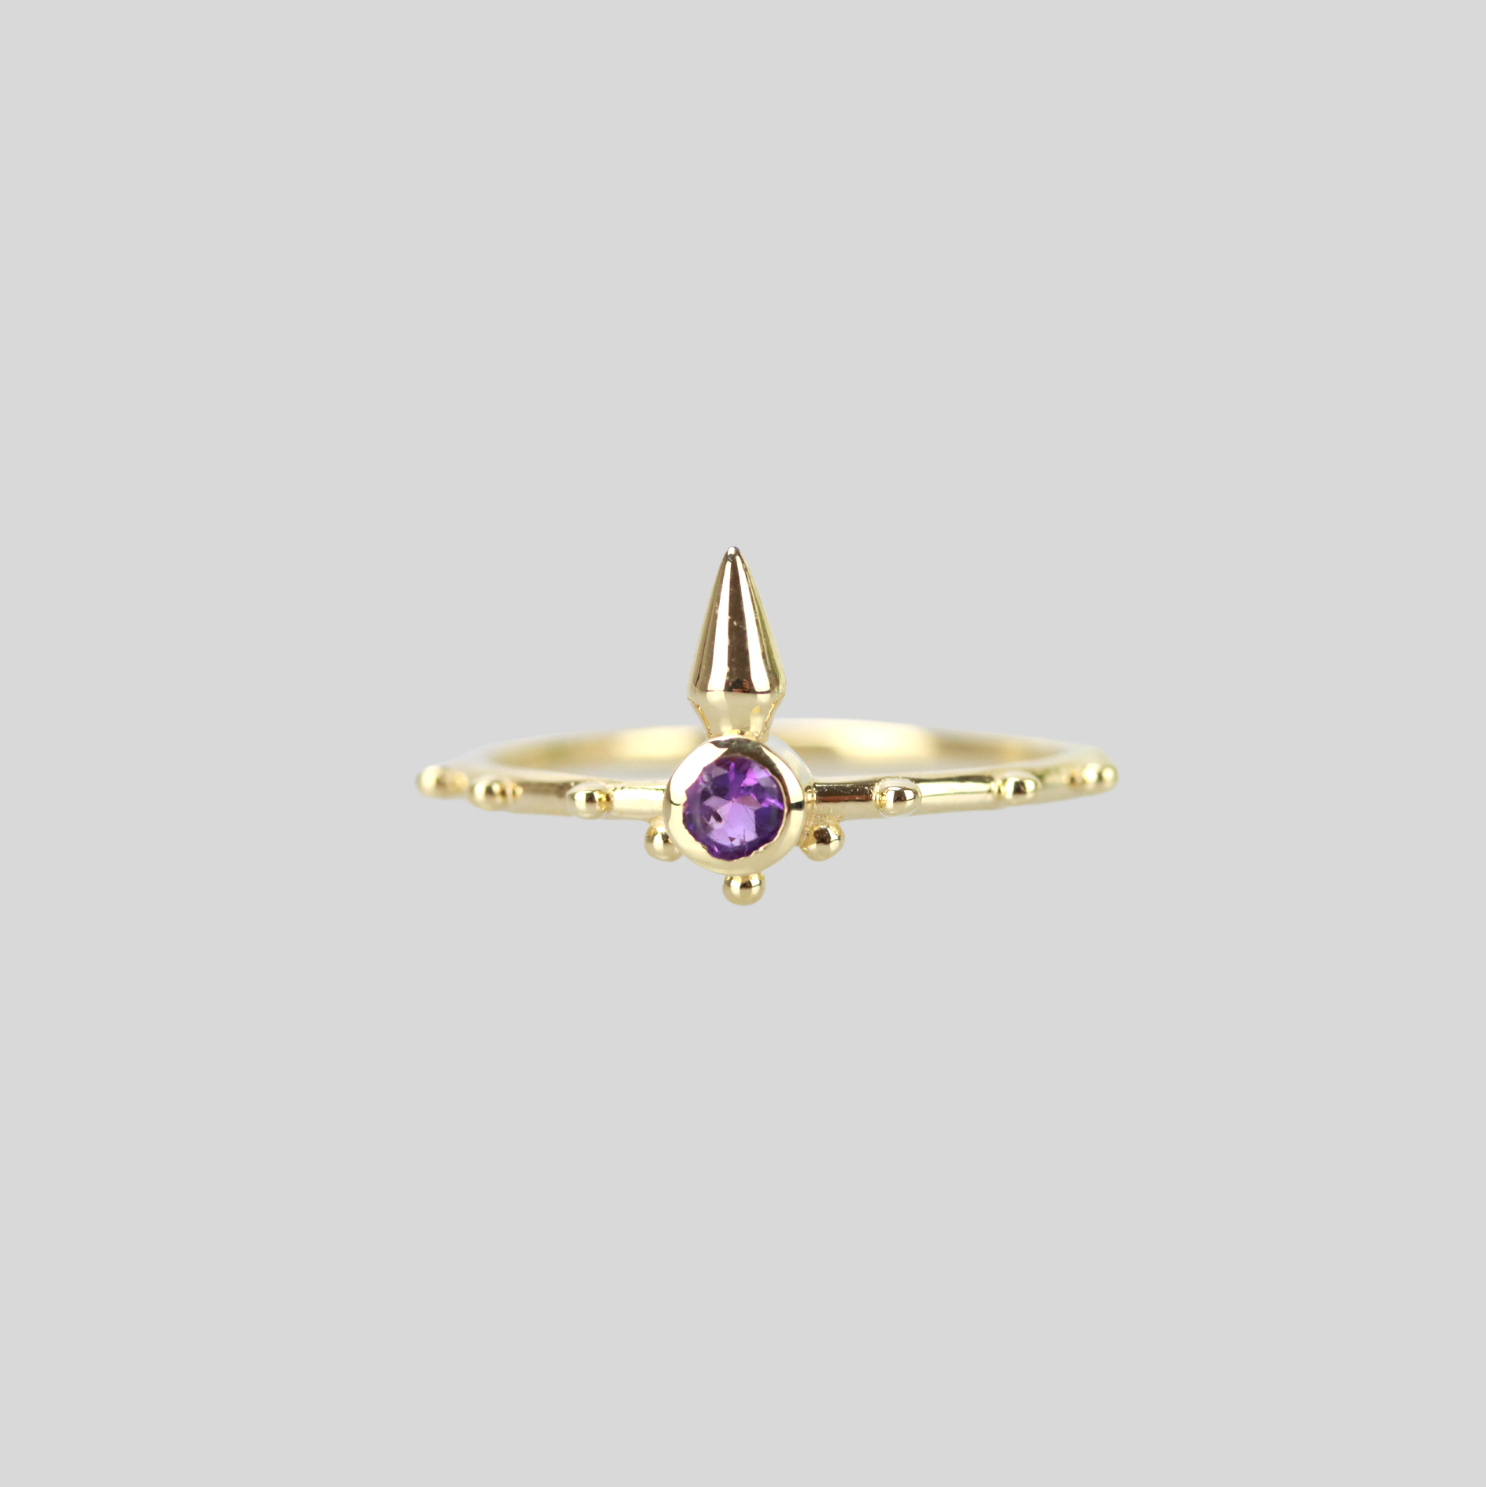 Solid 14k gold temple tower ring in amethyst